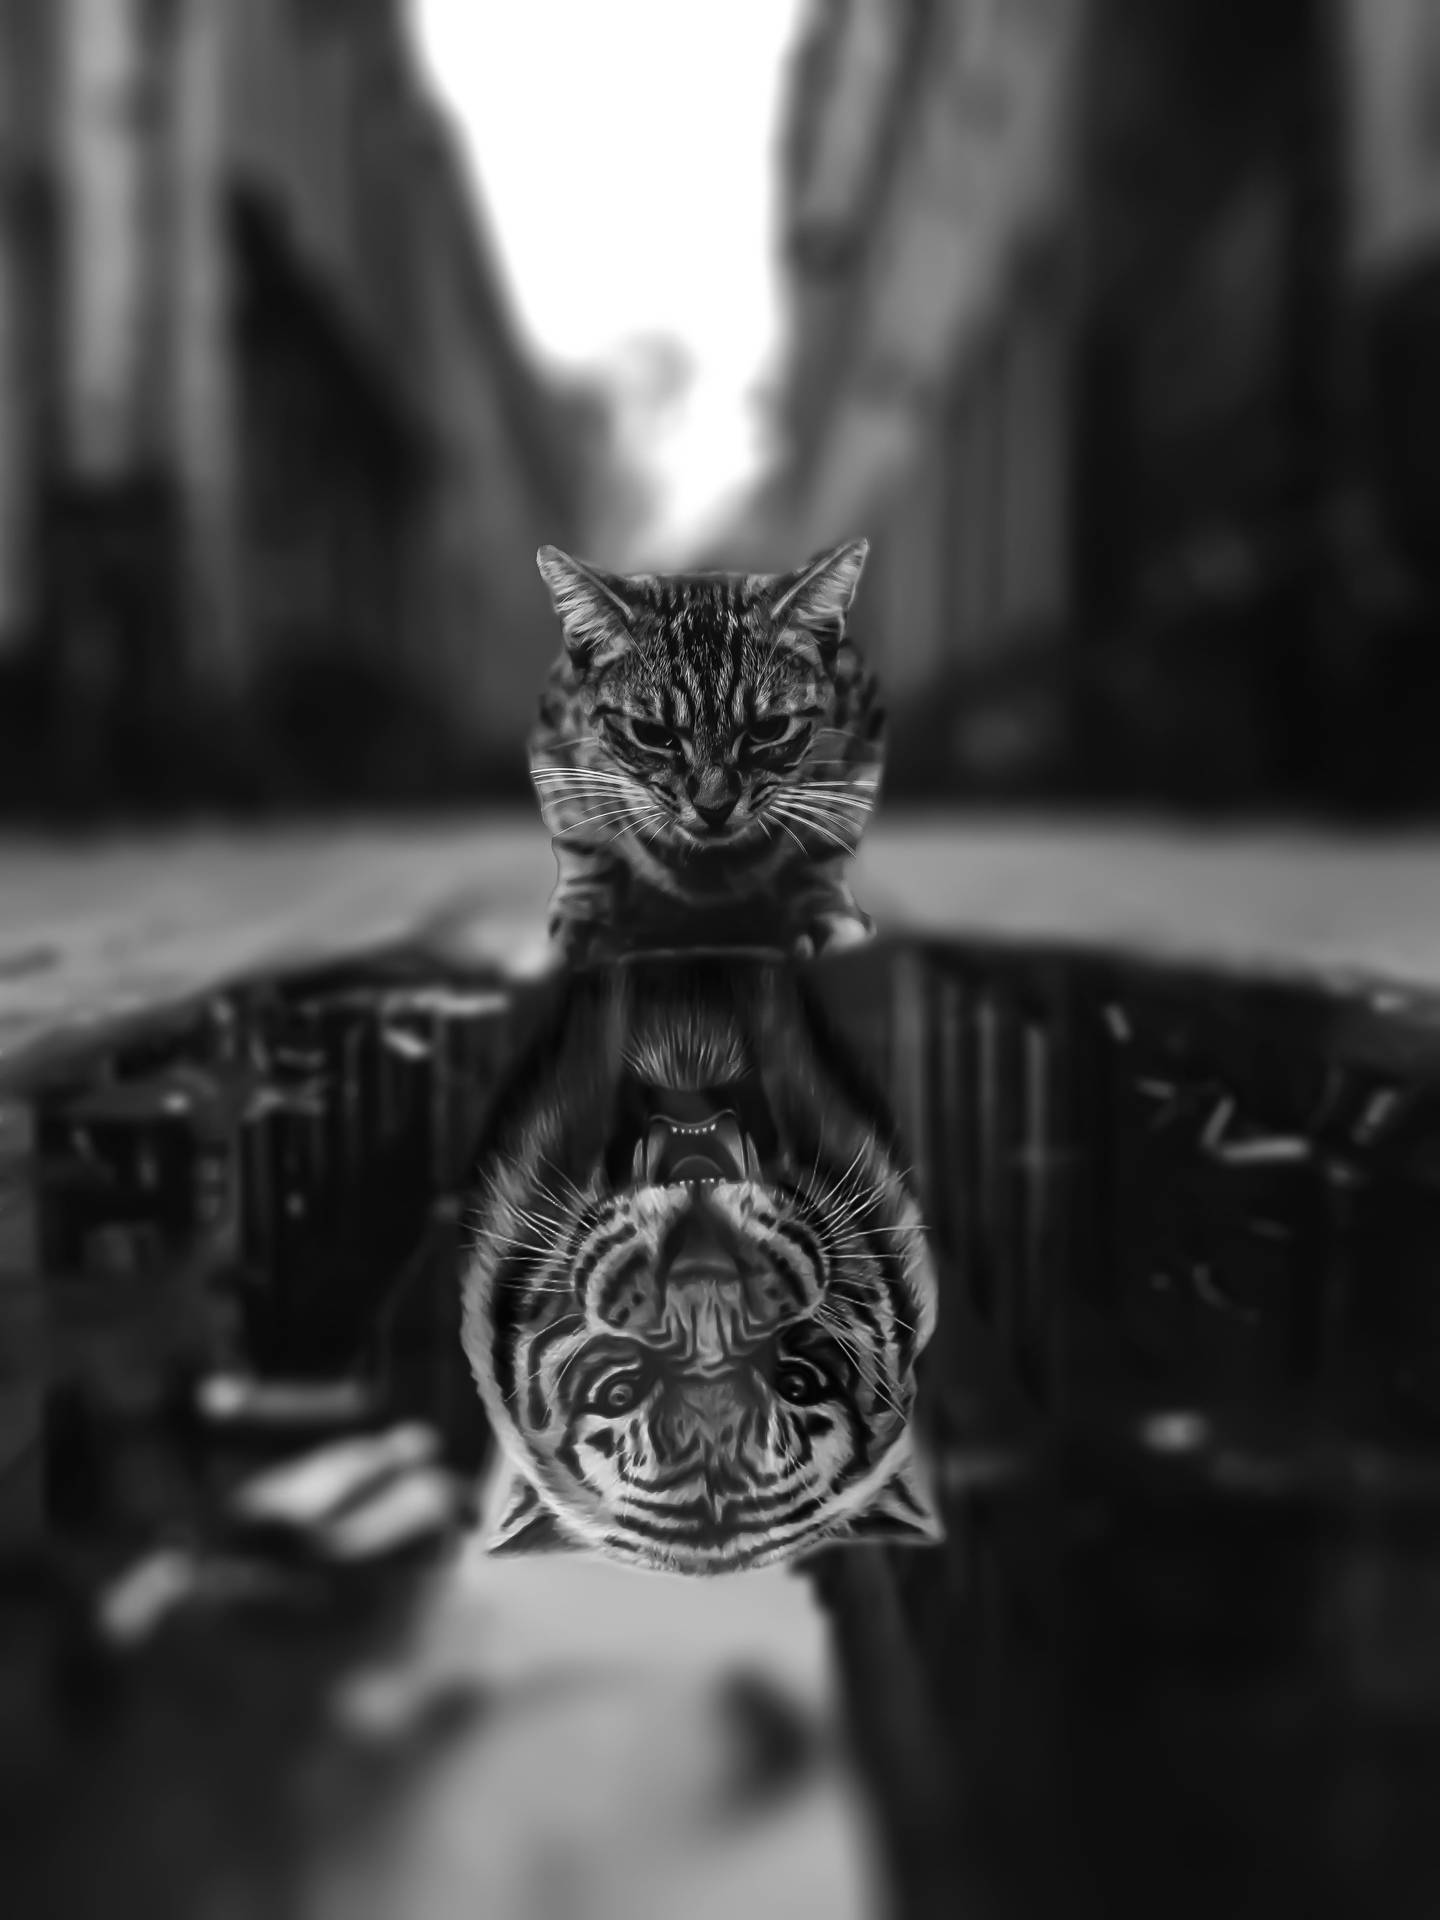 Black Tiger In The Reflection Wallpaper